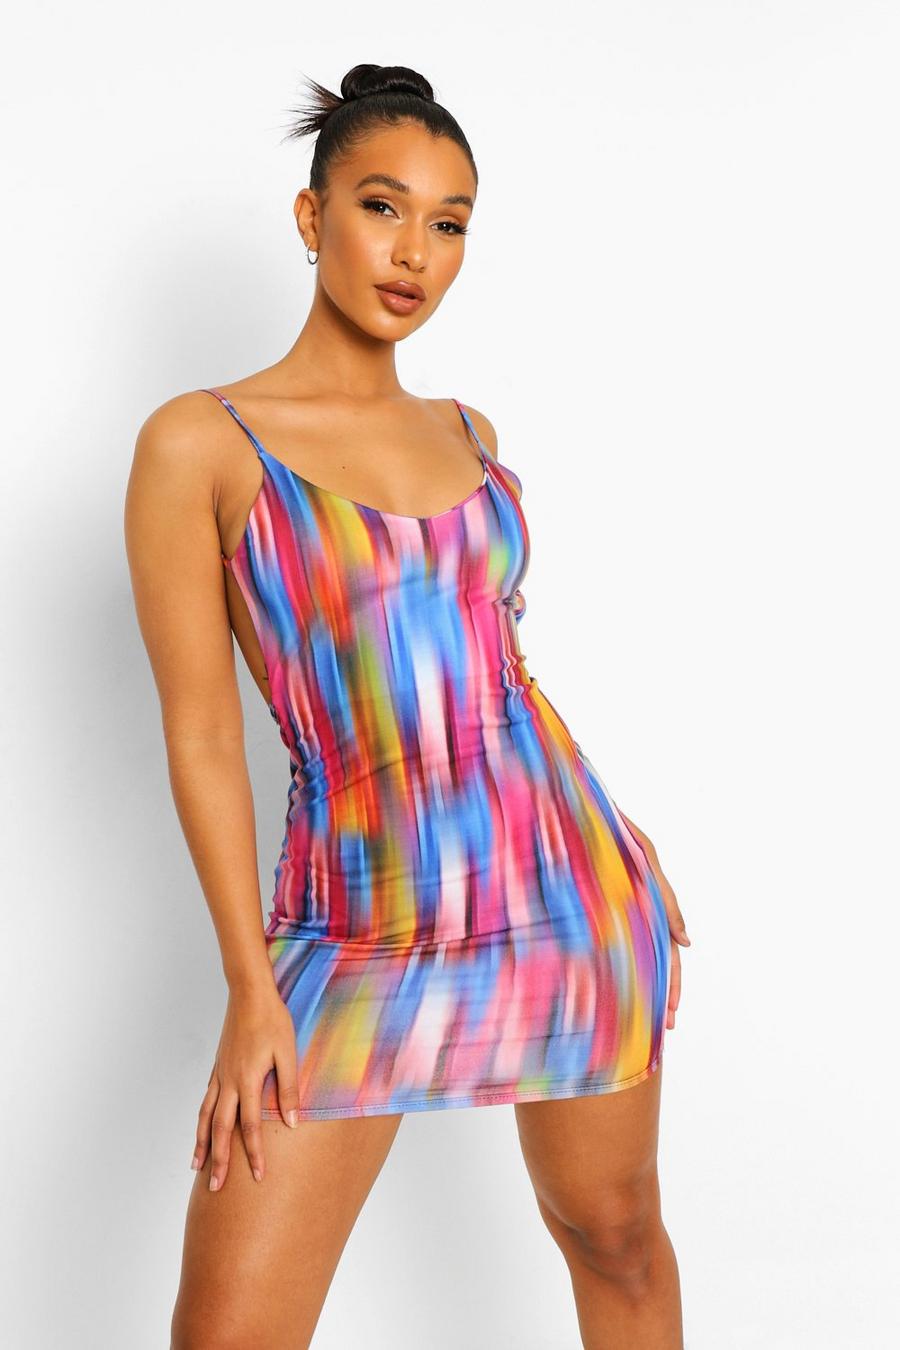  GOSIKH Dresses for Women Dress Women's Dress Body Heat Map Print  Rhinestone Print Cut Out Backless Bodycon Dress Dress (Color : Multicolor,  Size : X-Small) : Clothing, Shoes & Jewelry